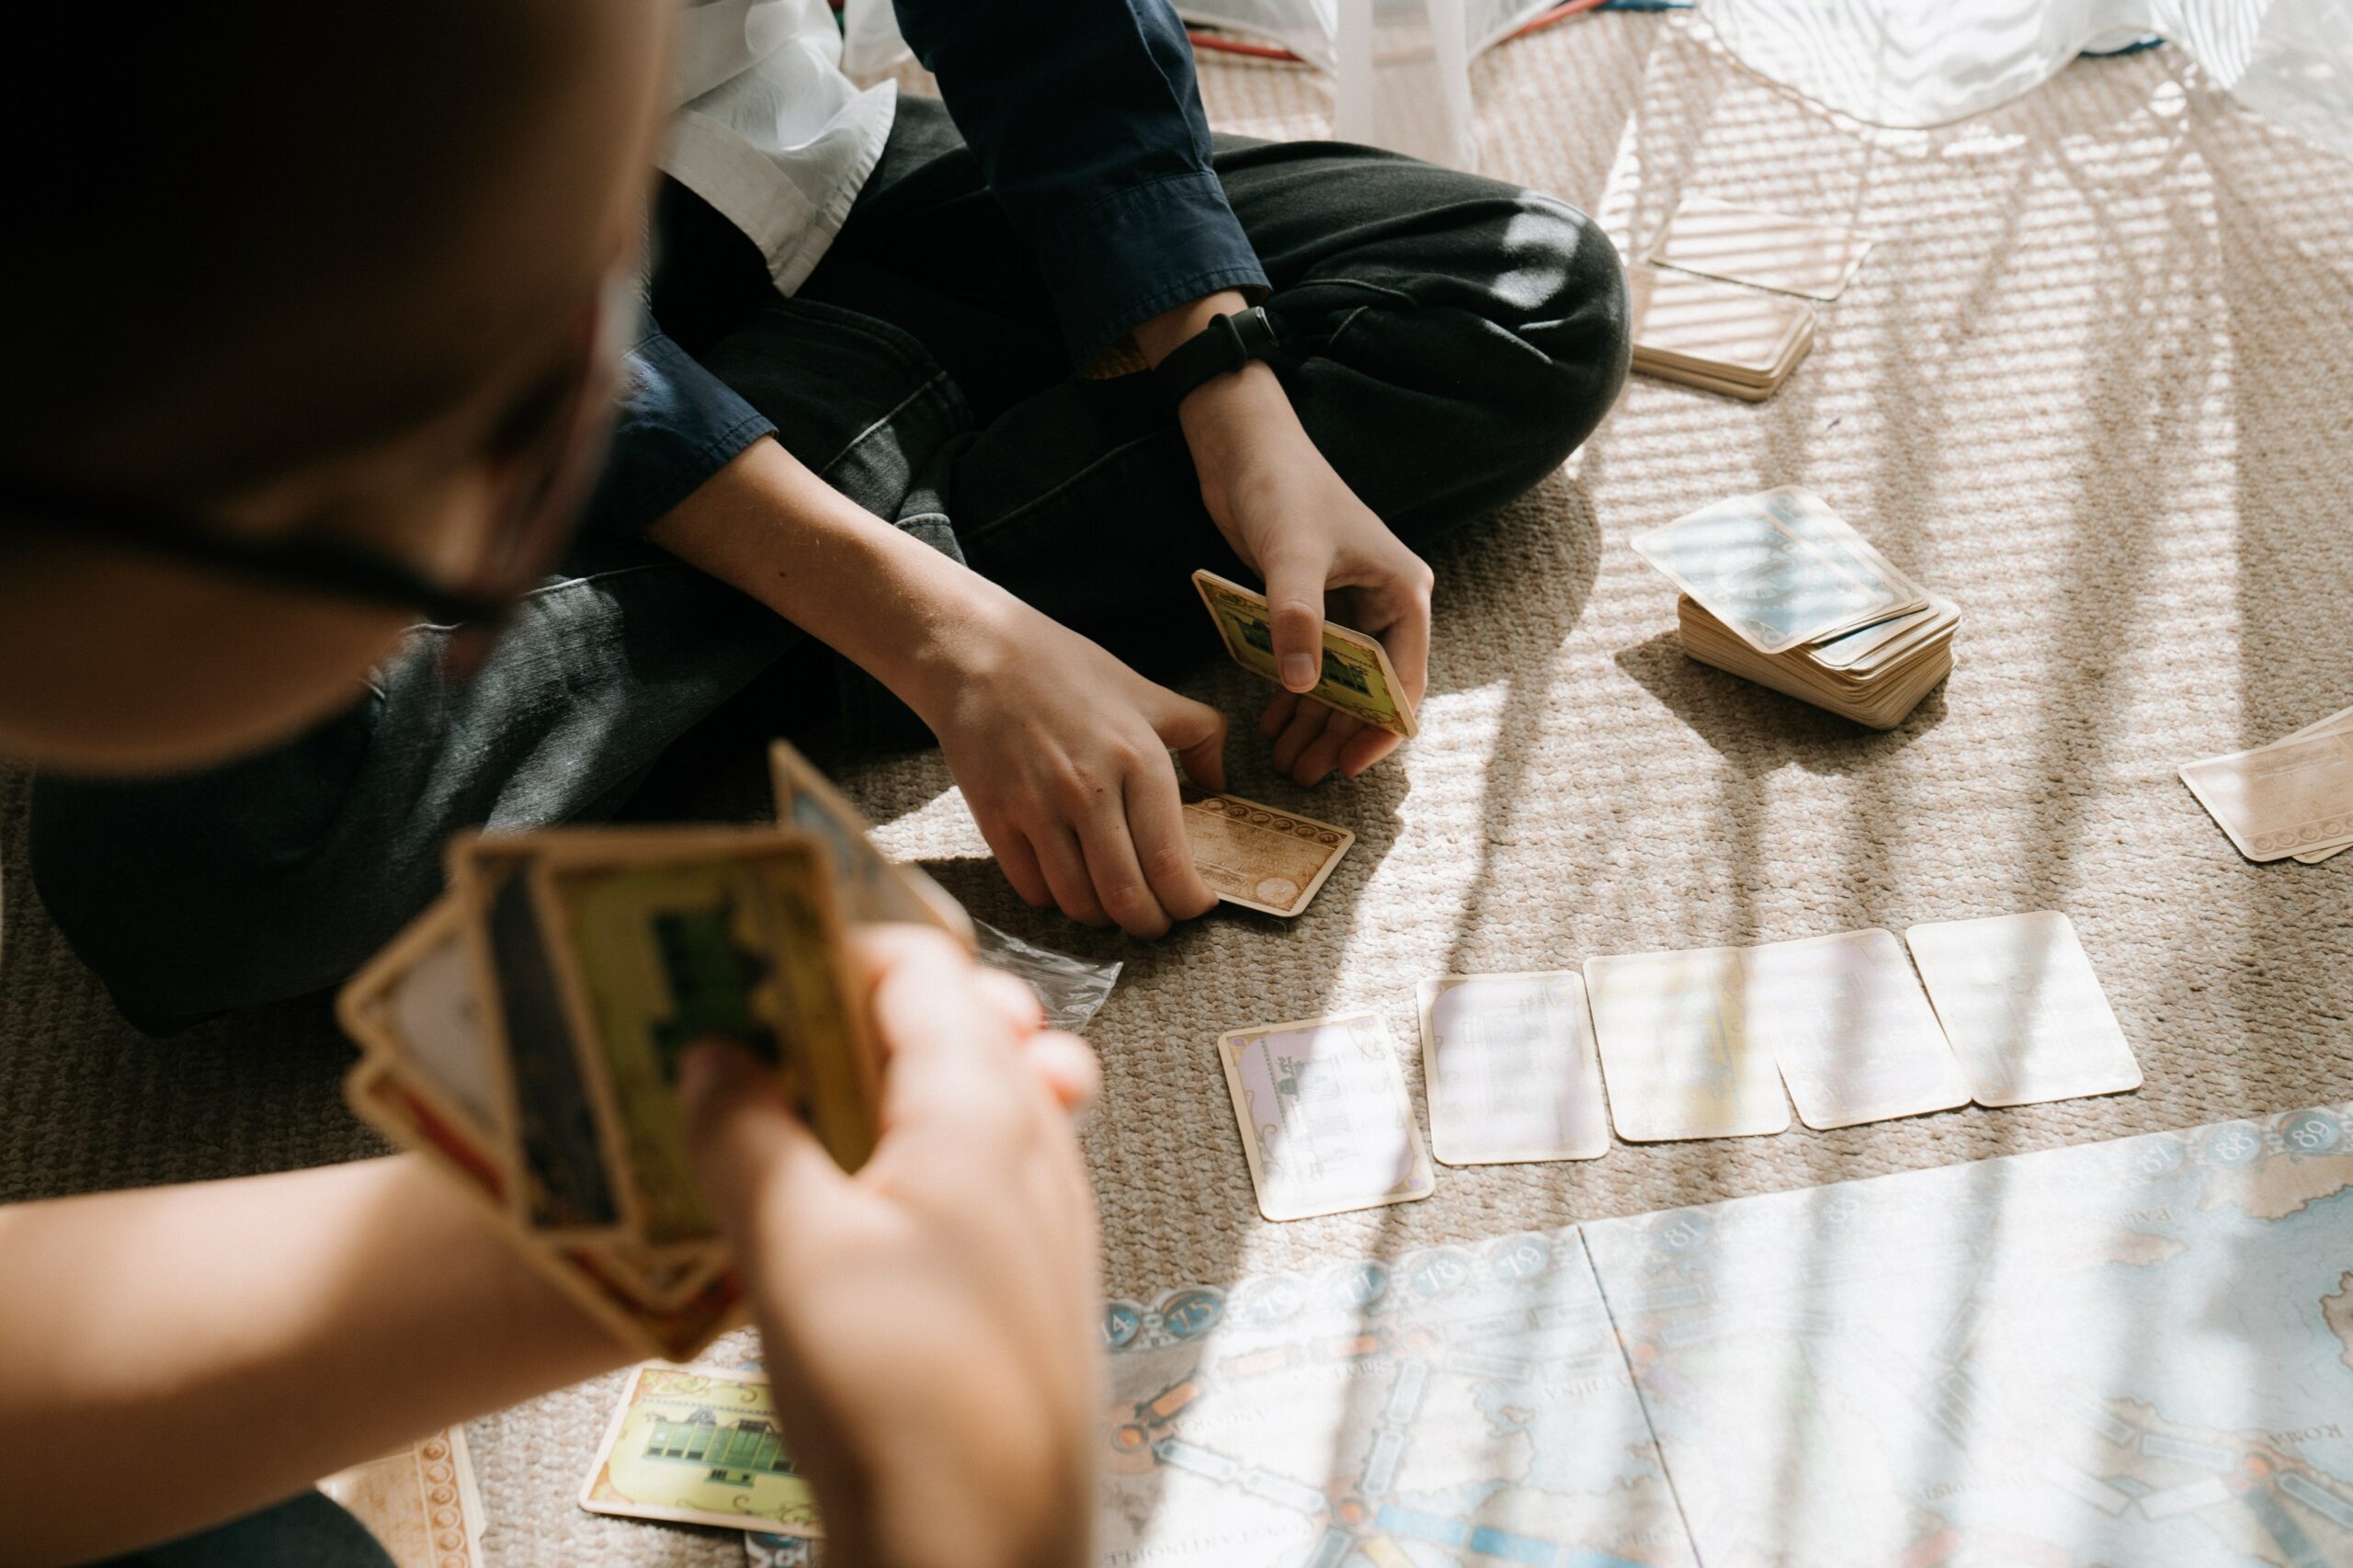 adventure board games appeal to both kids and adults